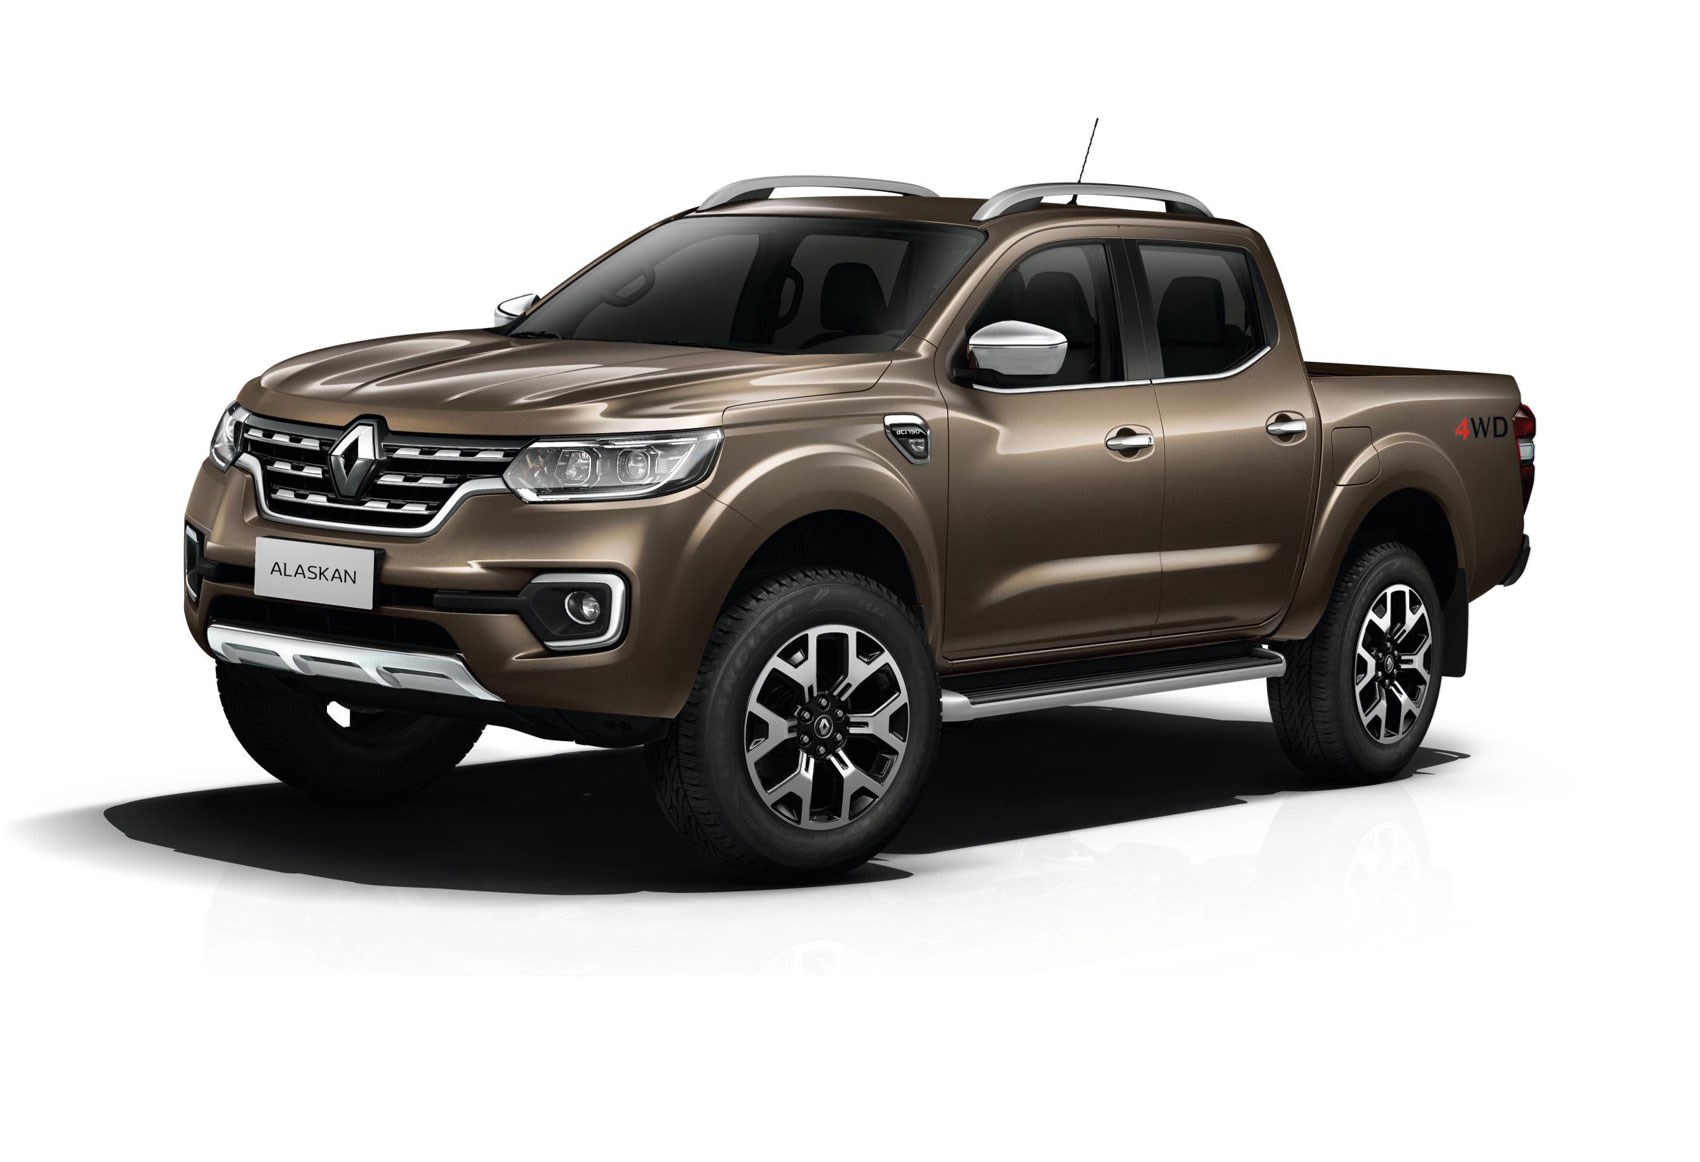 Meet the Renault Alaskan – the French firm's first pick-up